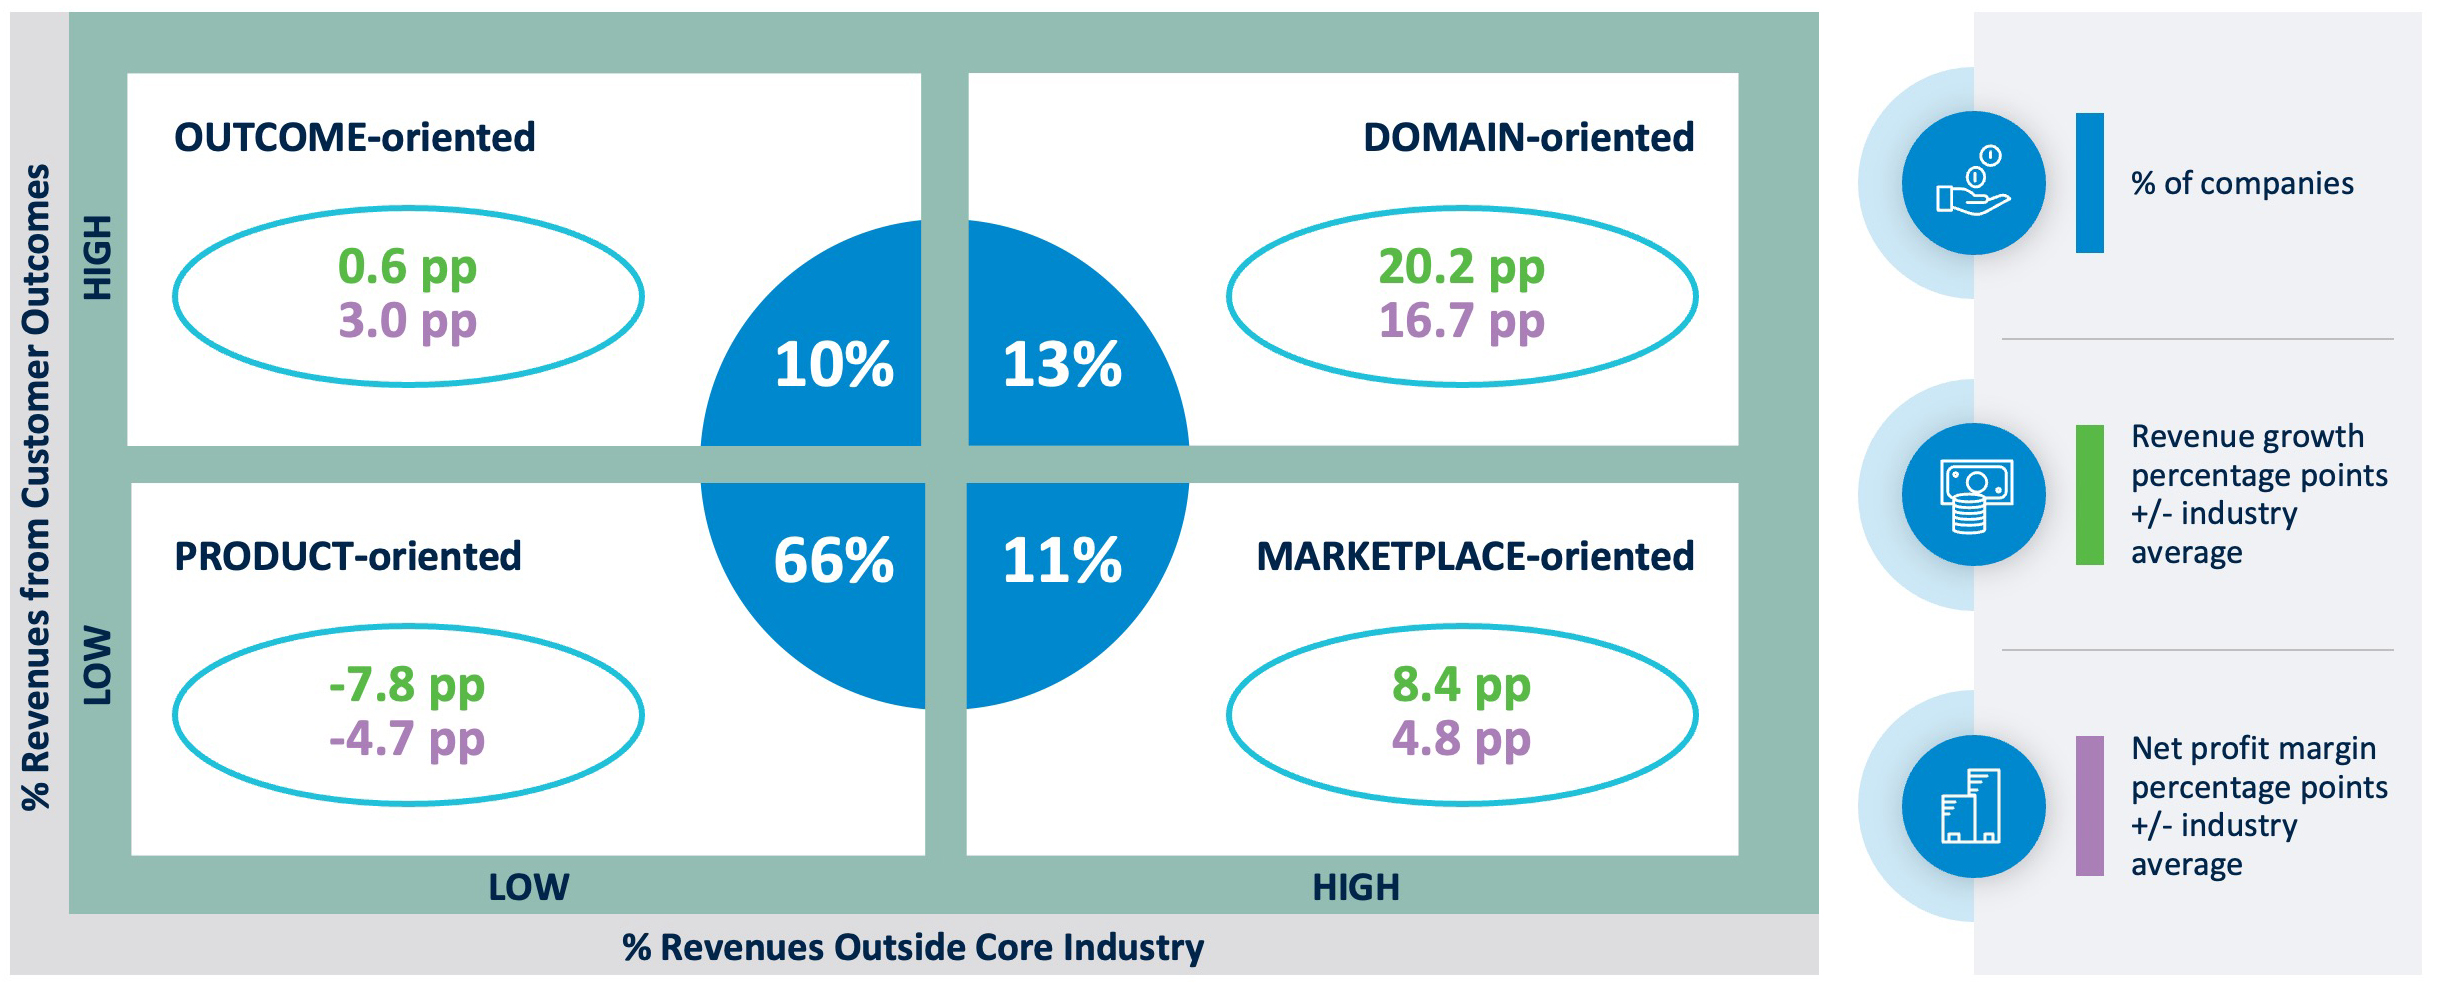 Figure 1: Domain-oriented companies focused on both customer outcomes and curated products—and performed better